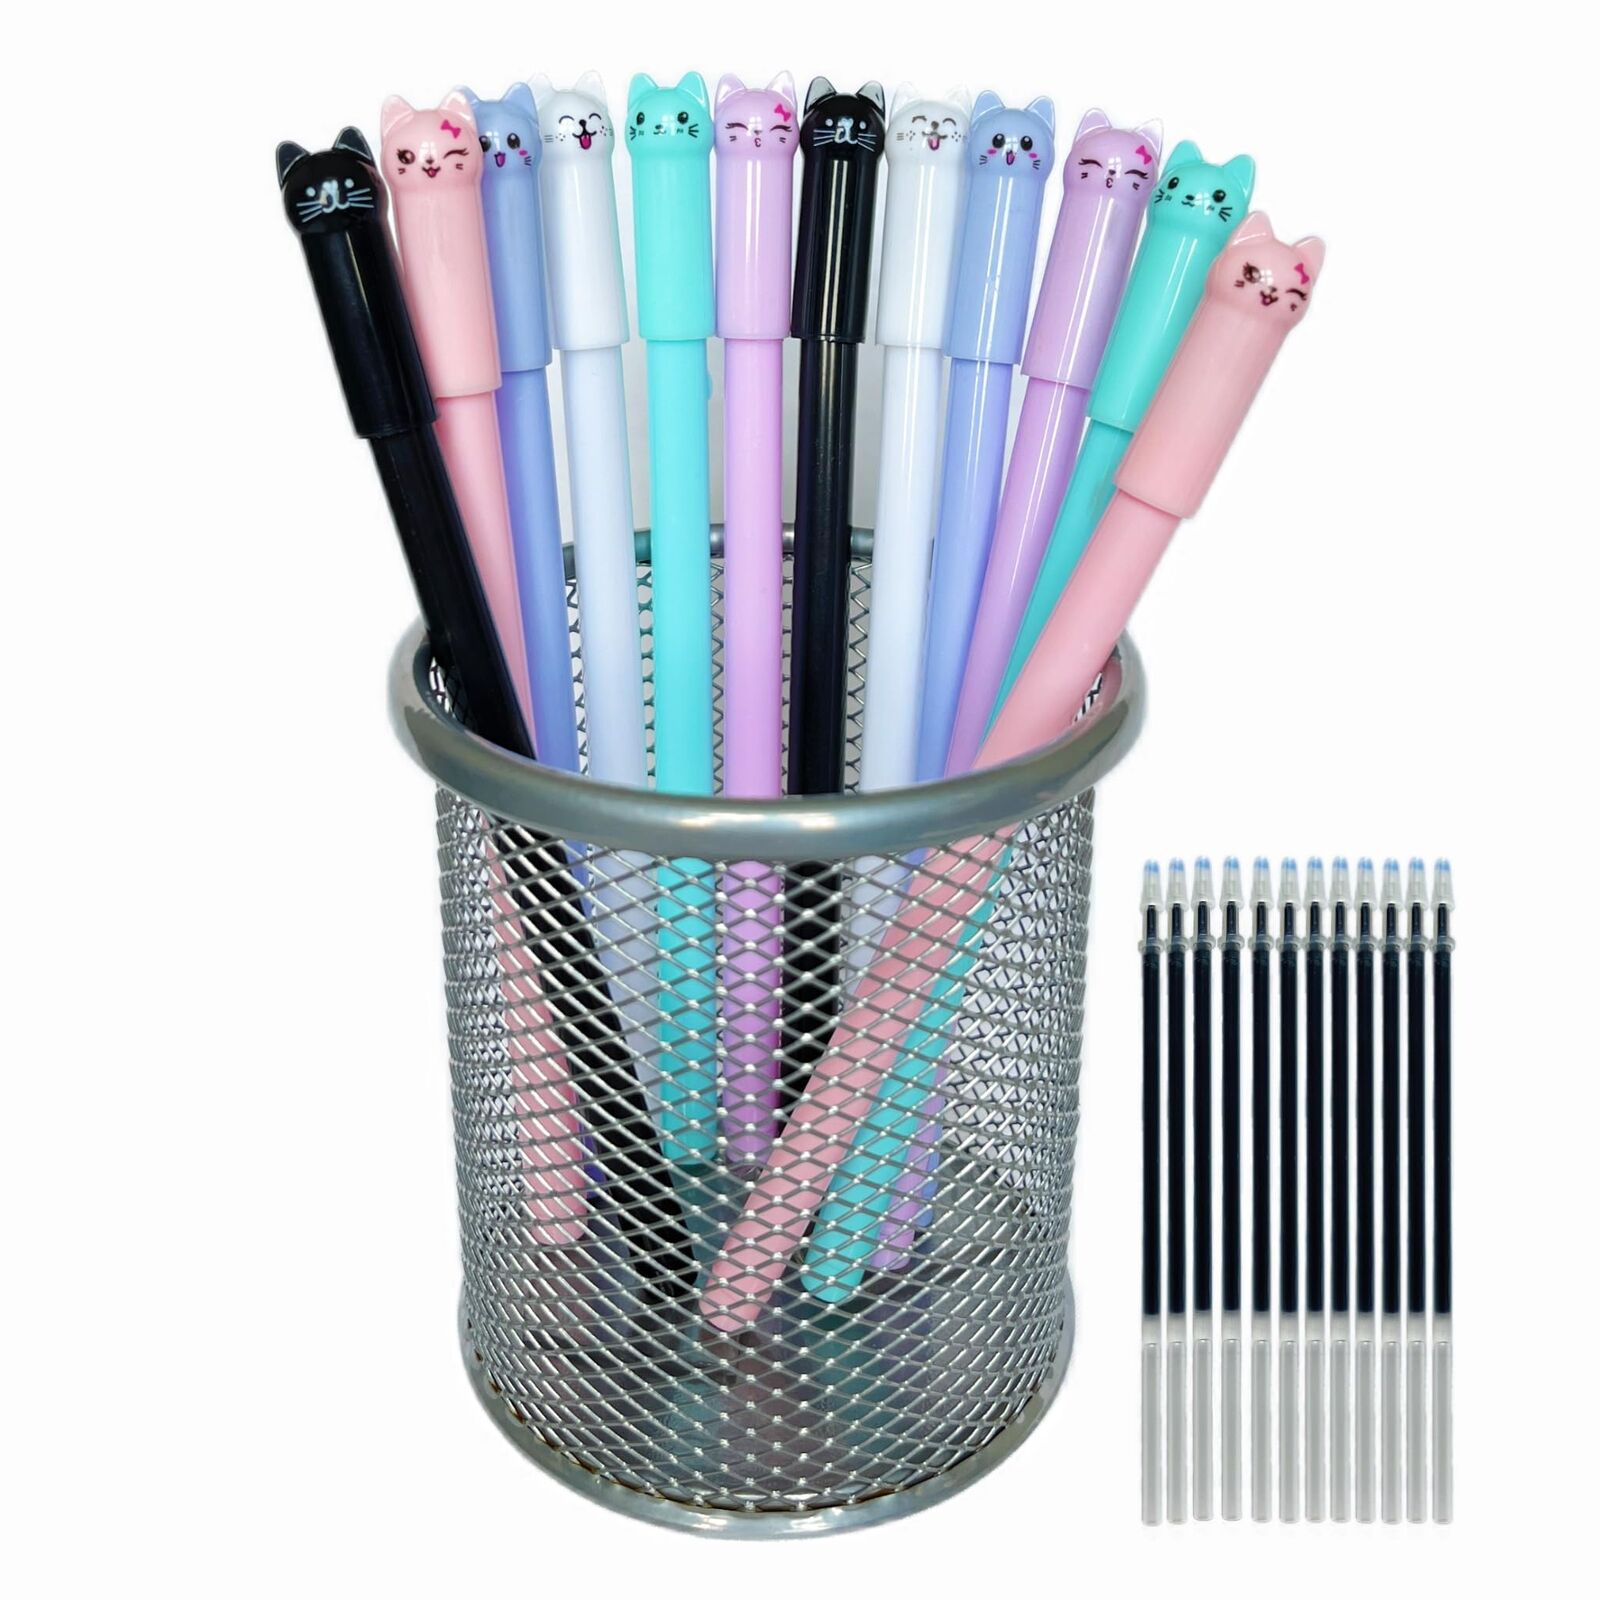 Cat Pens 12pcs Cute Cat Gel Pens with 0.5mm Black Ink Fun Gifts for Kids Scho...